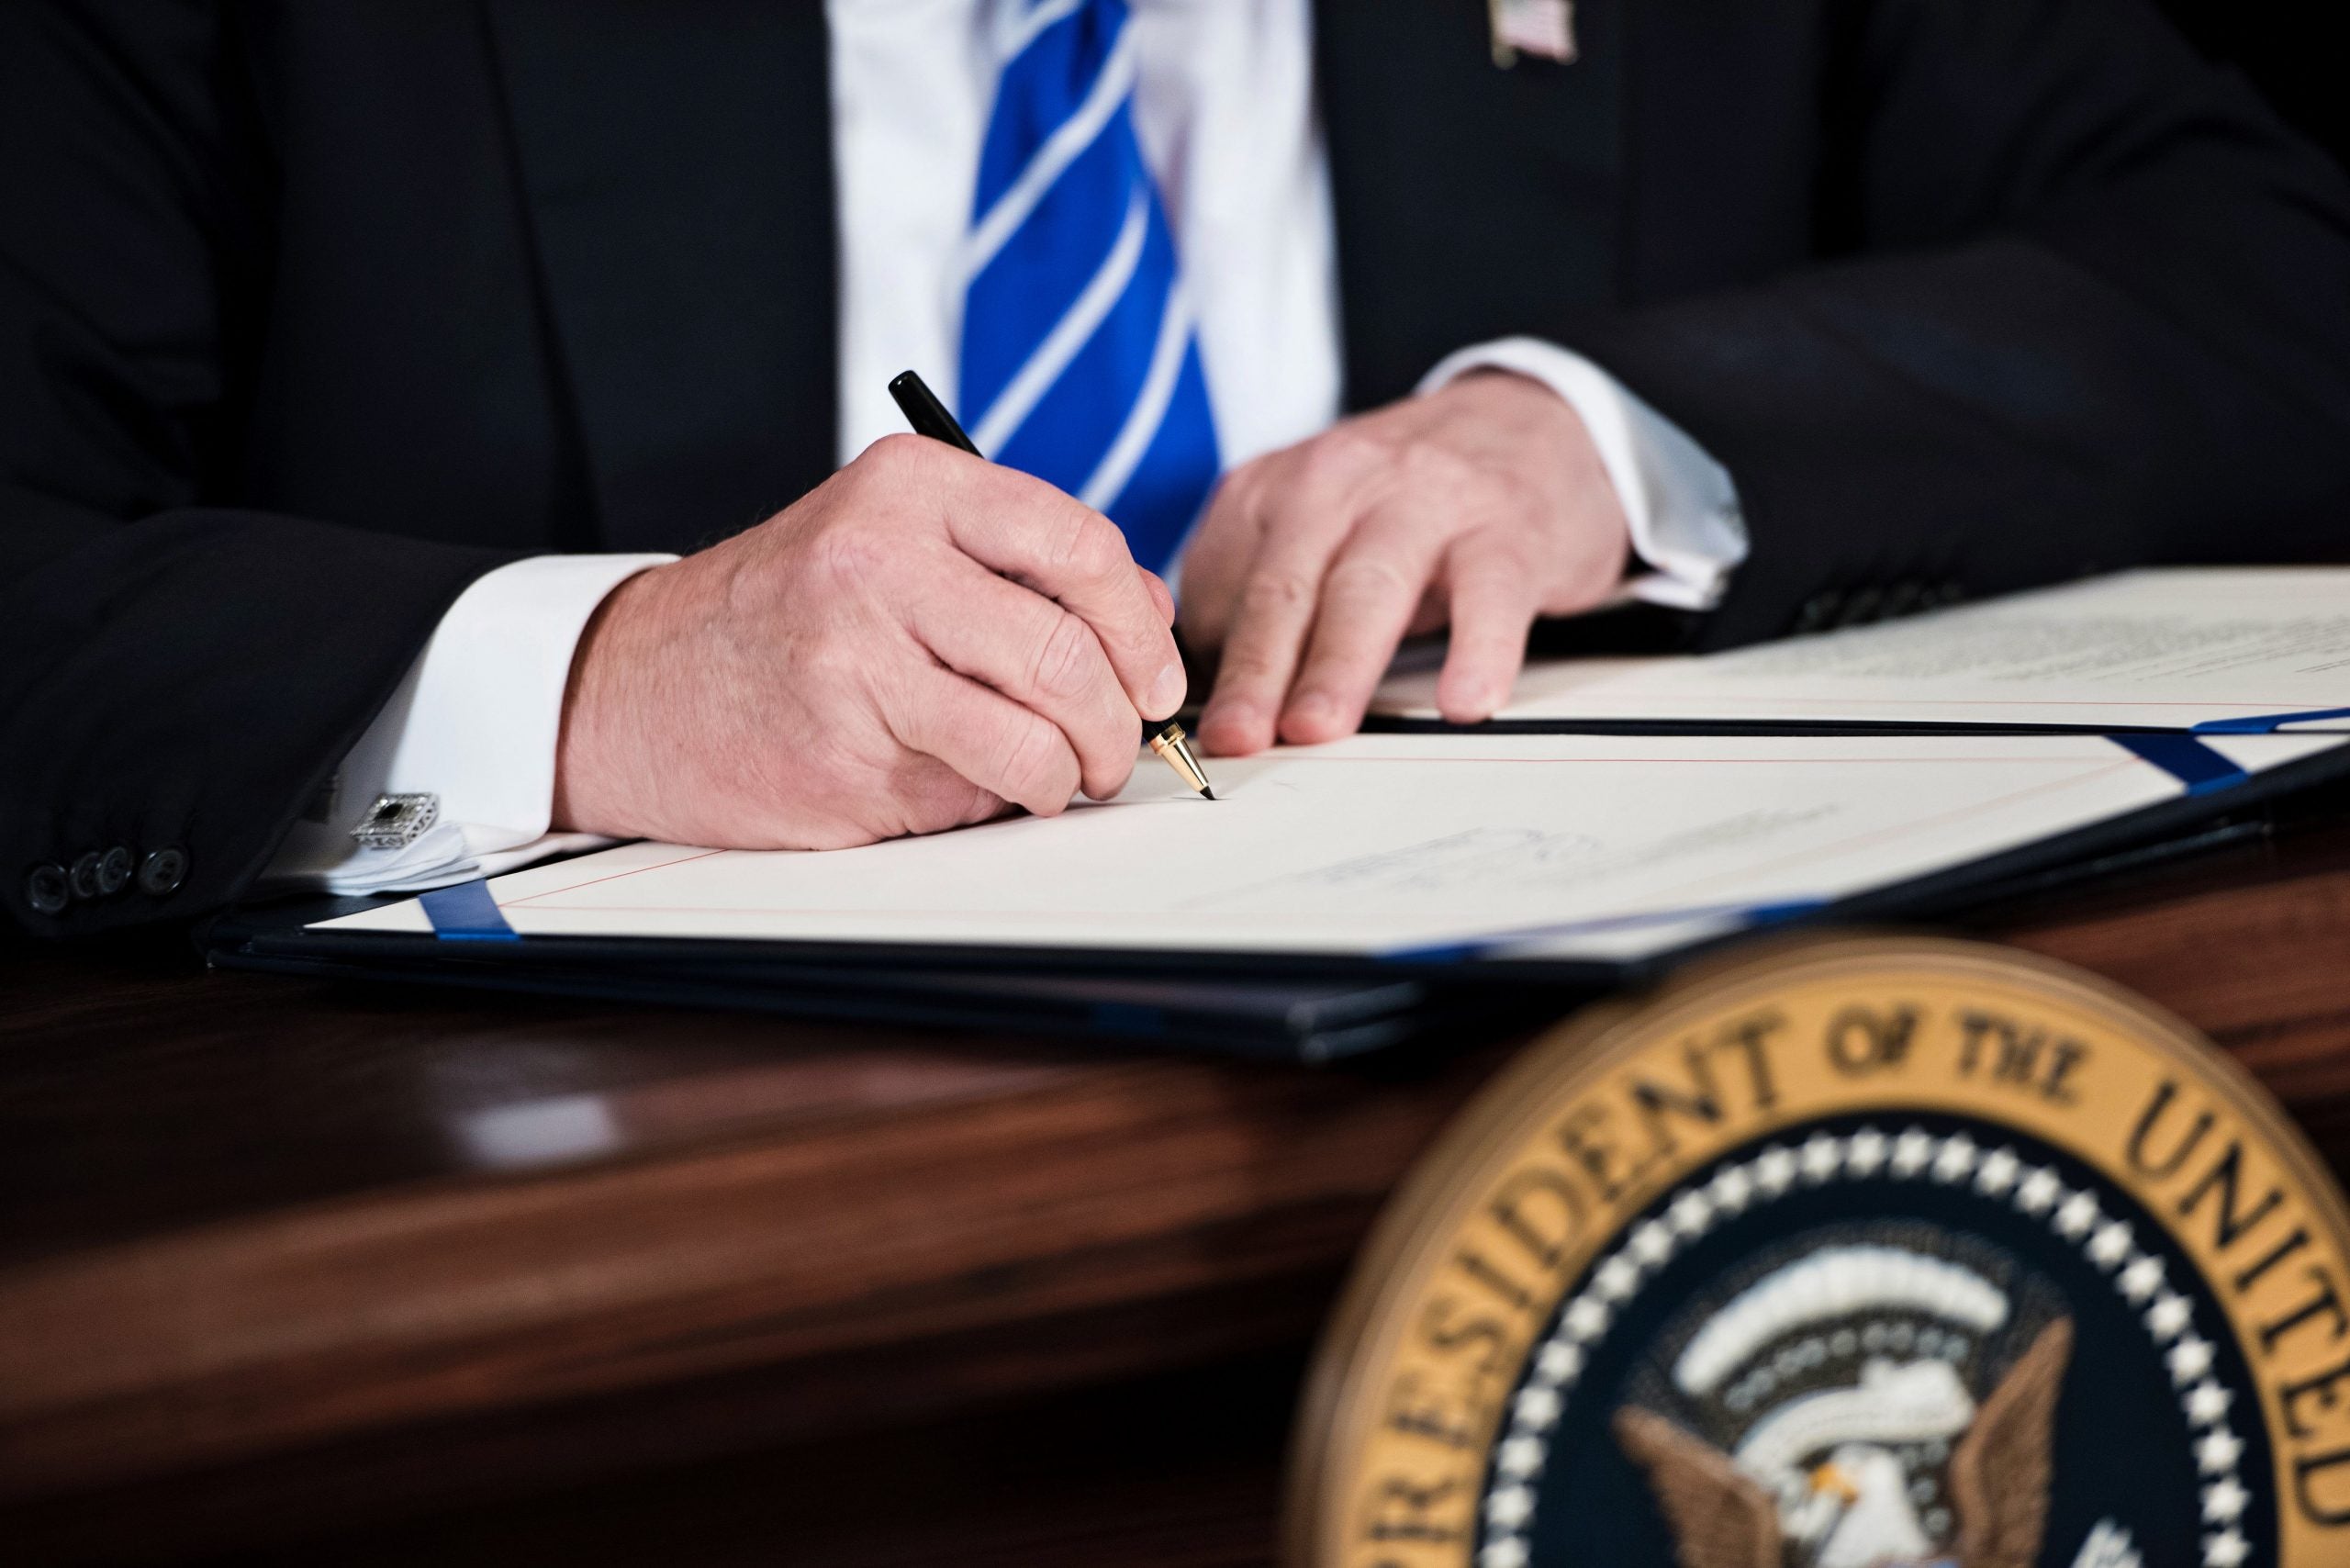 President Trump Signs 5 Week PPP Application Extension into Law